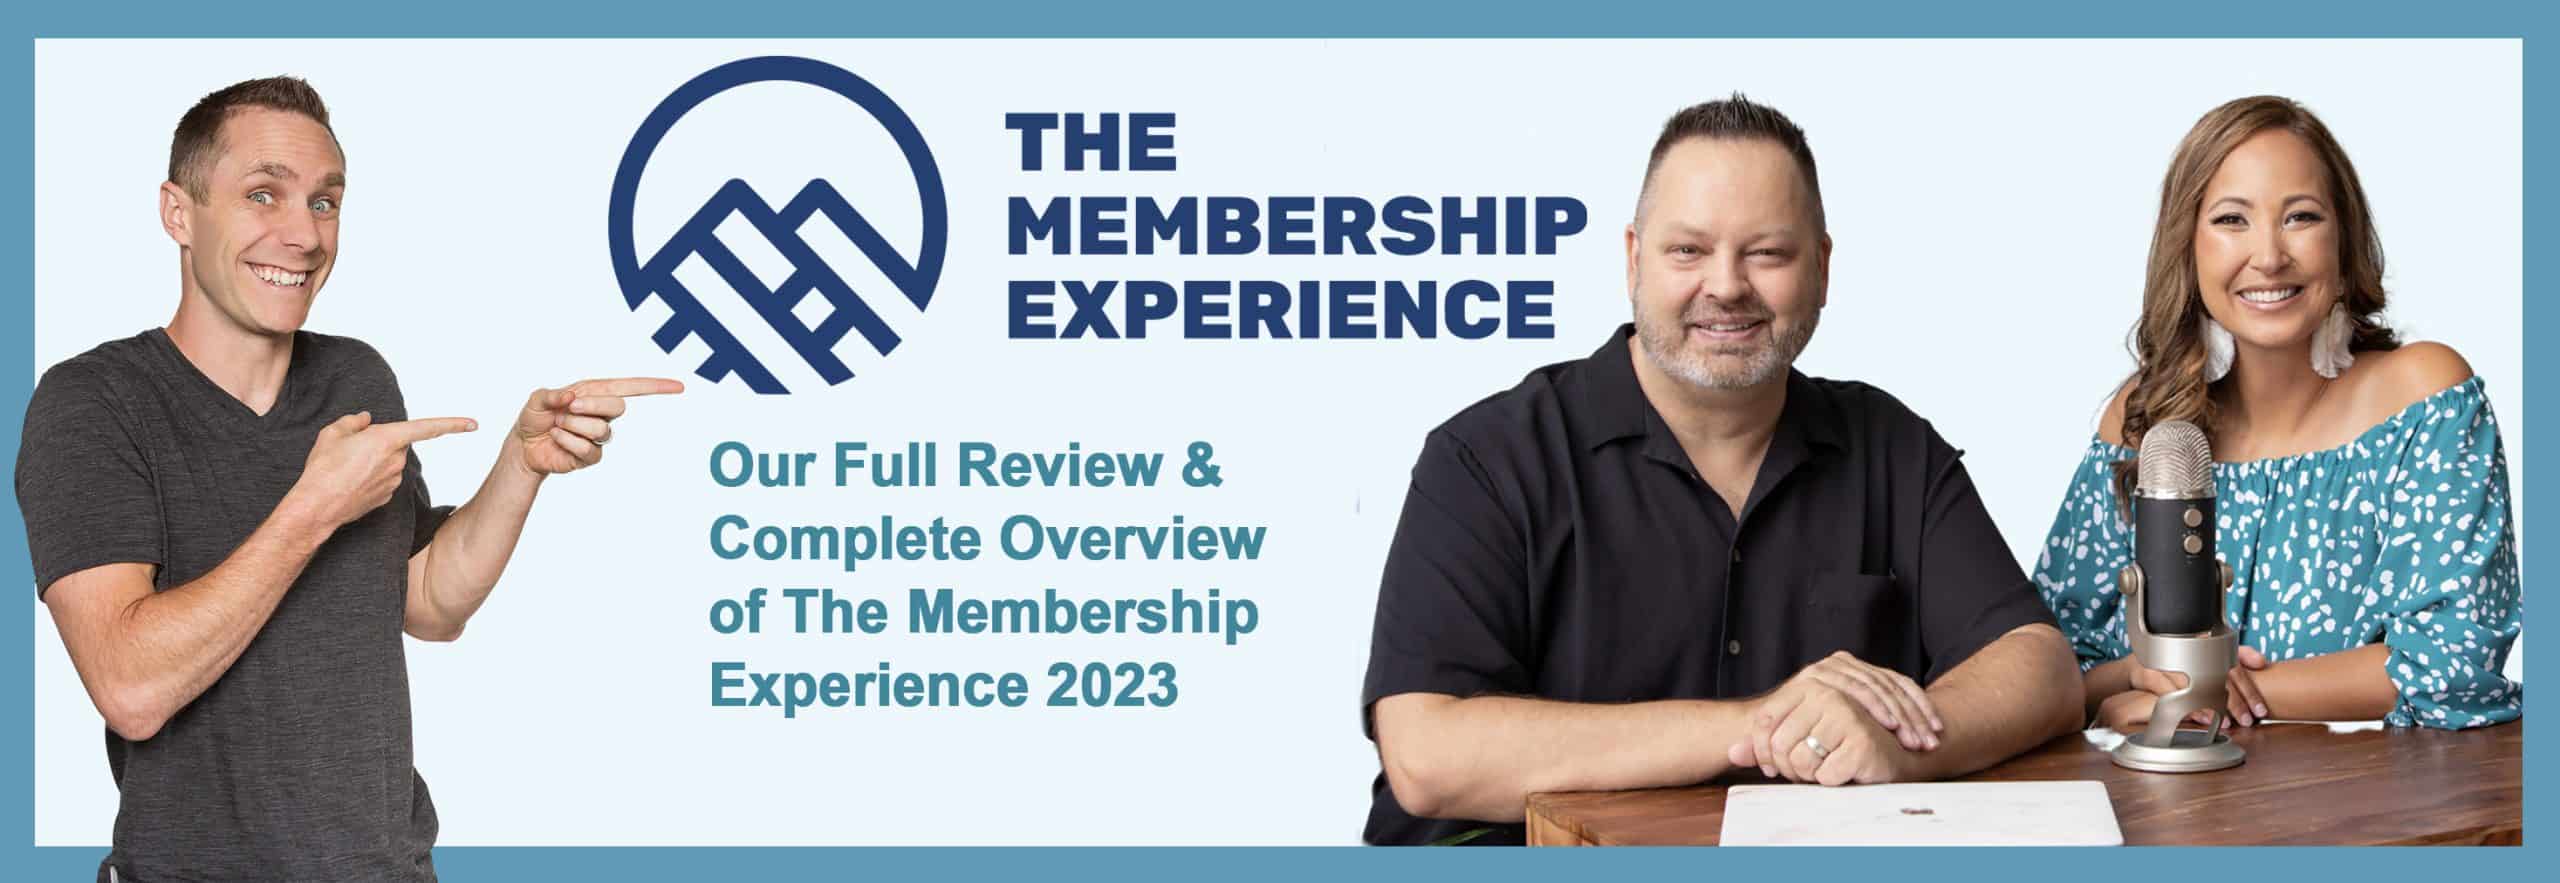 Stu McLaren's Membership Experience 2023 Complete Overview and Review